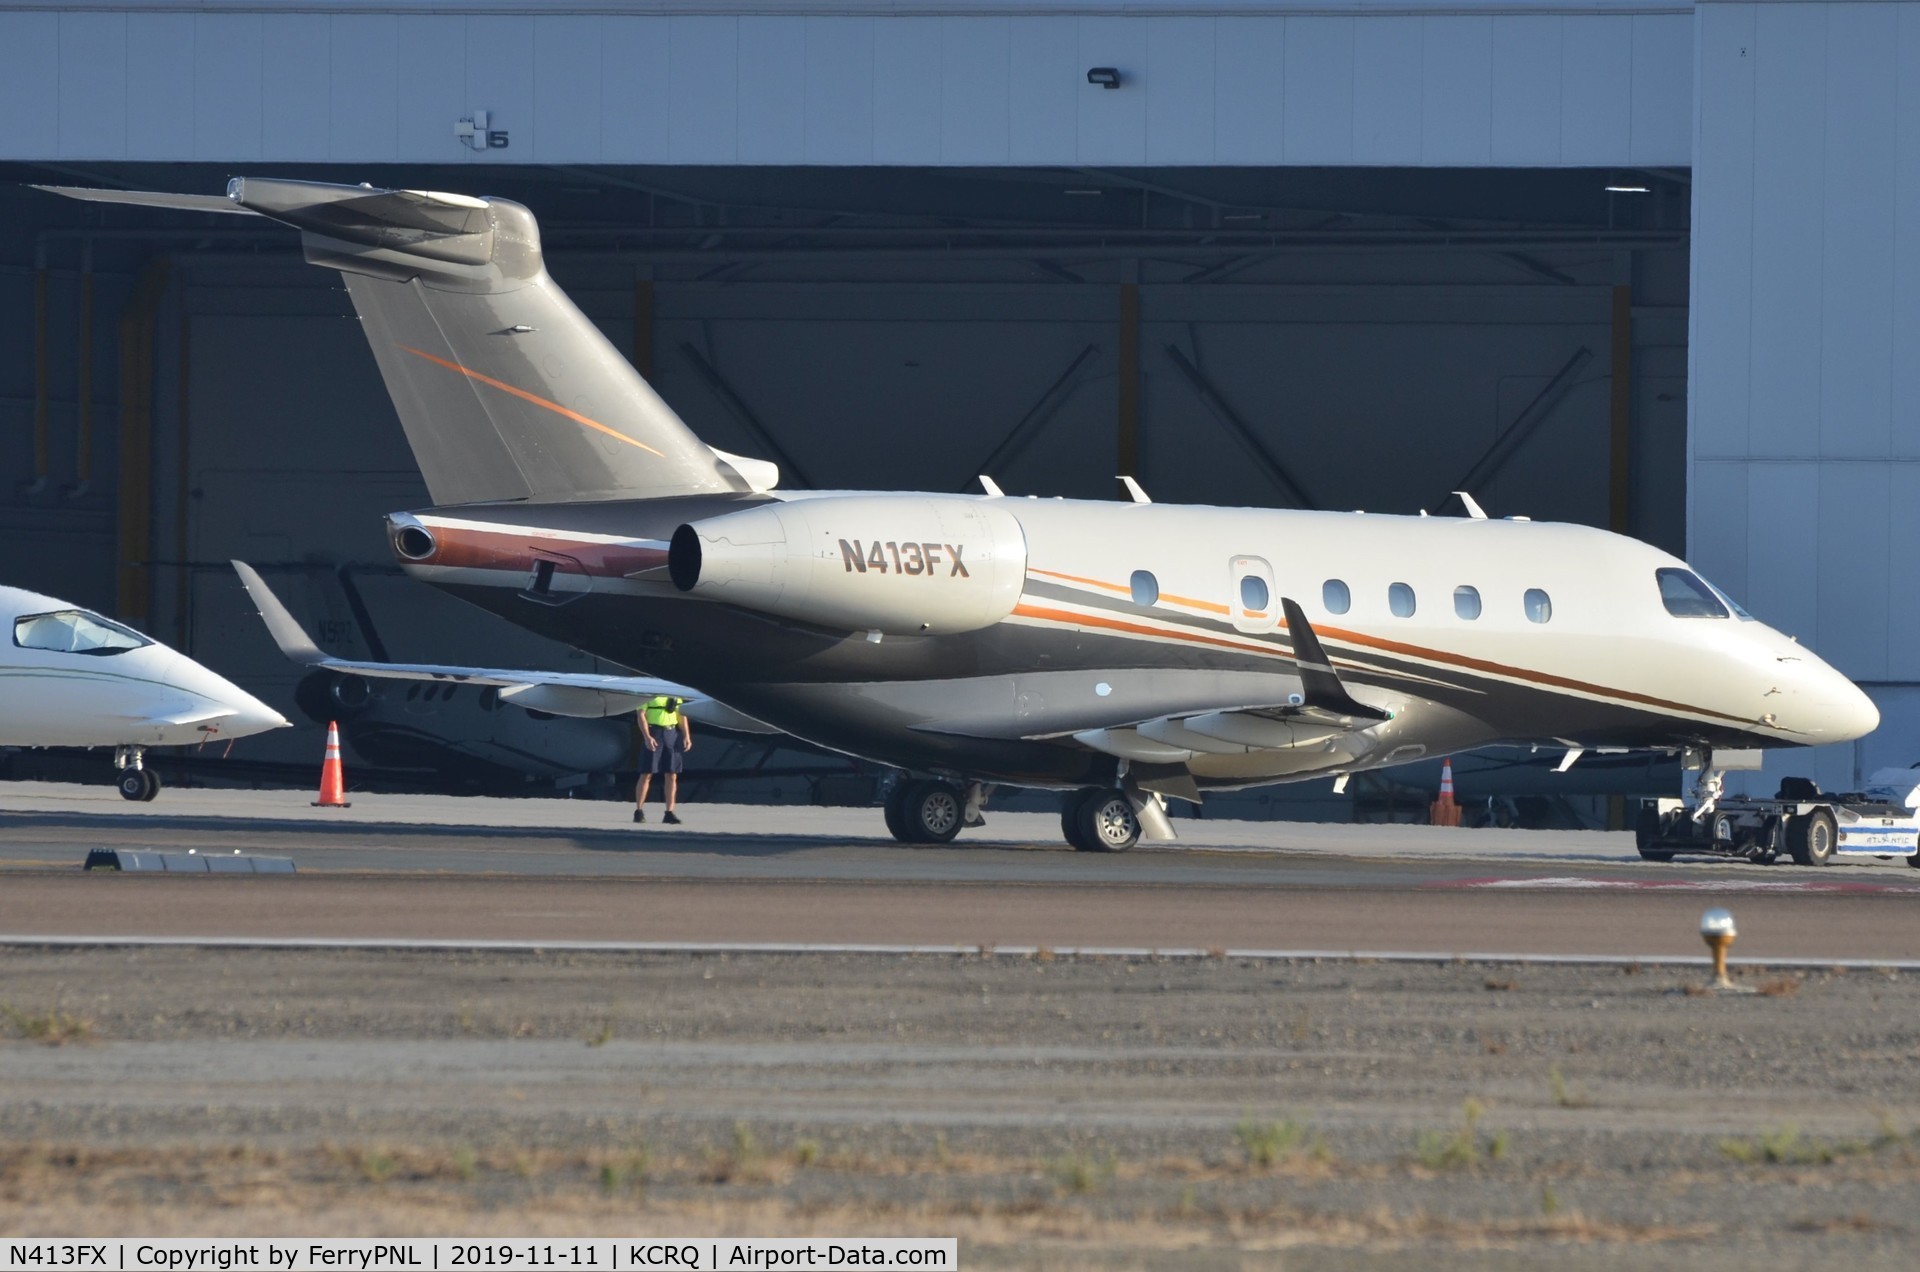 N413FX, 2017 Embraer EMB-545 Legacy 450 C/N 55010030, Flexjet EMB545 under tow after arrival from Mexico.